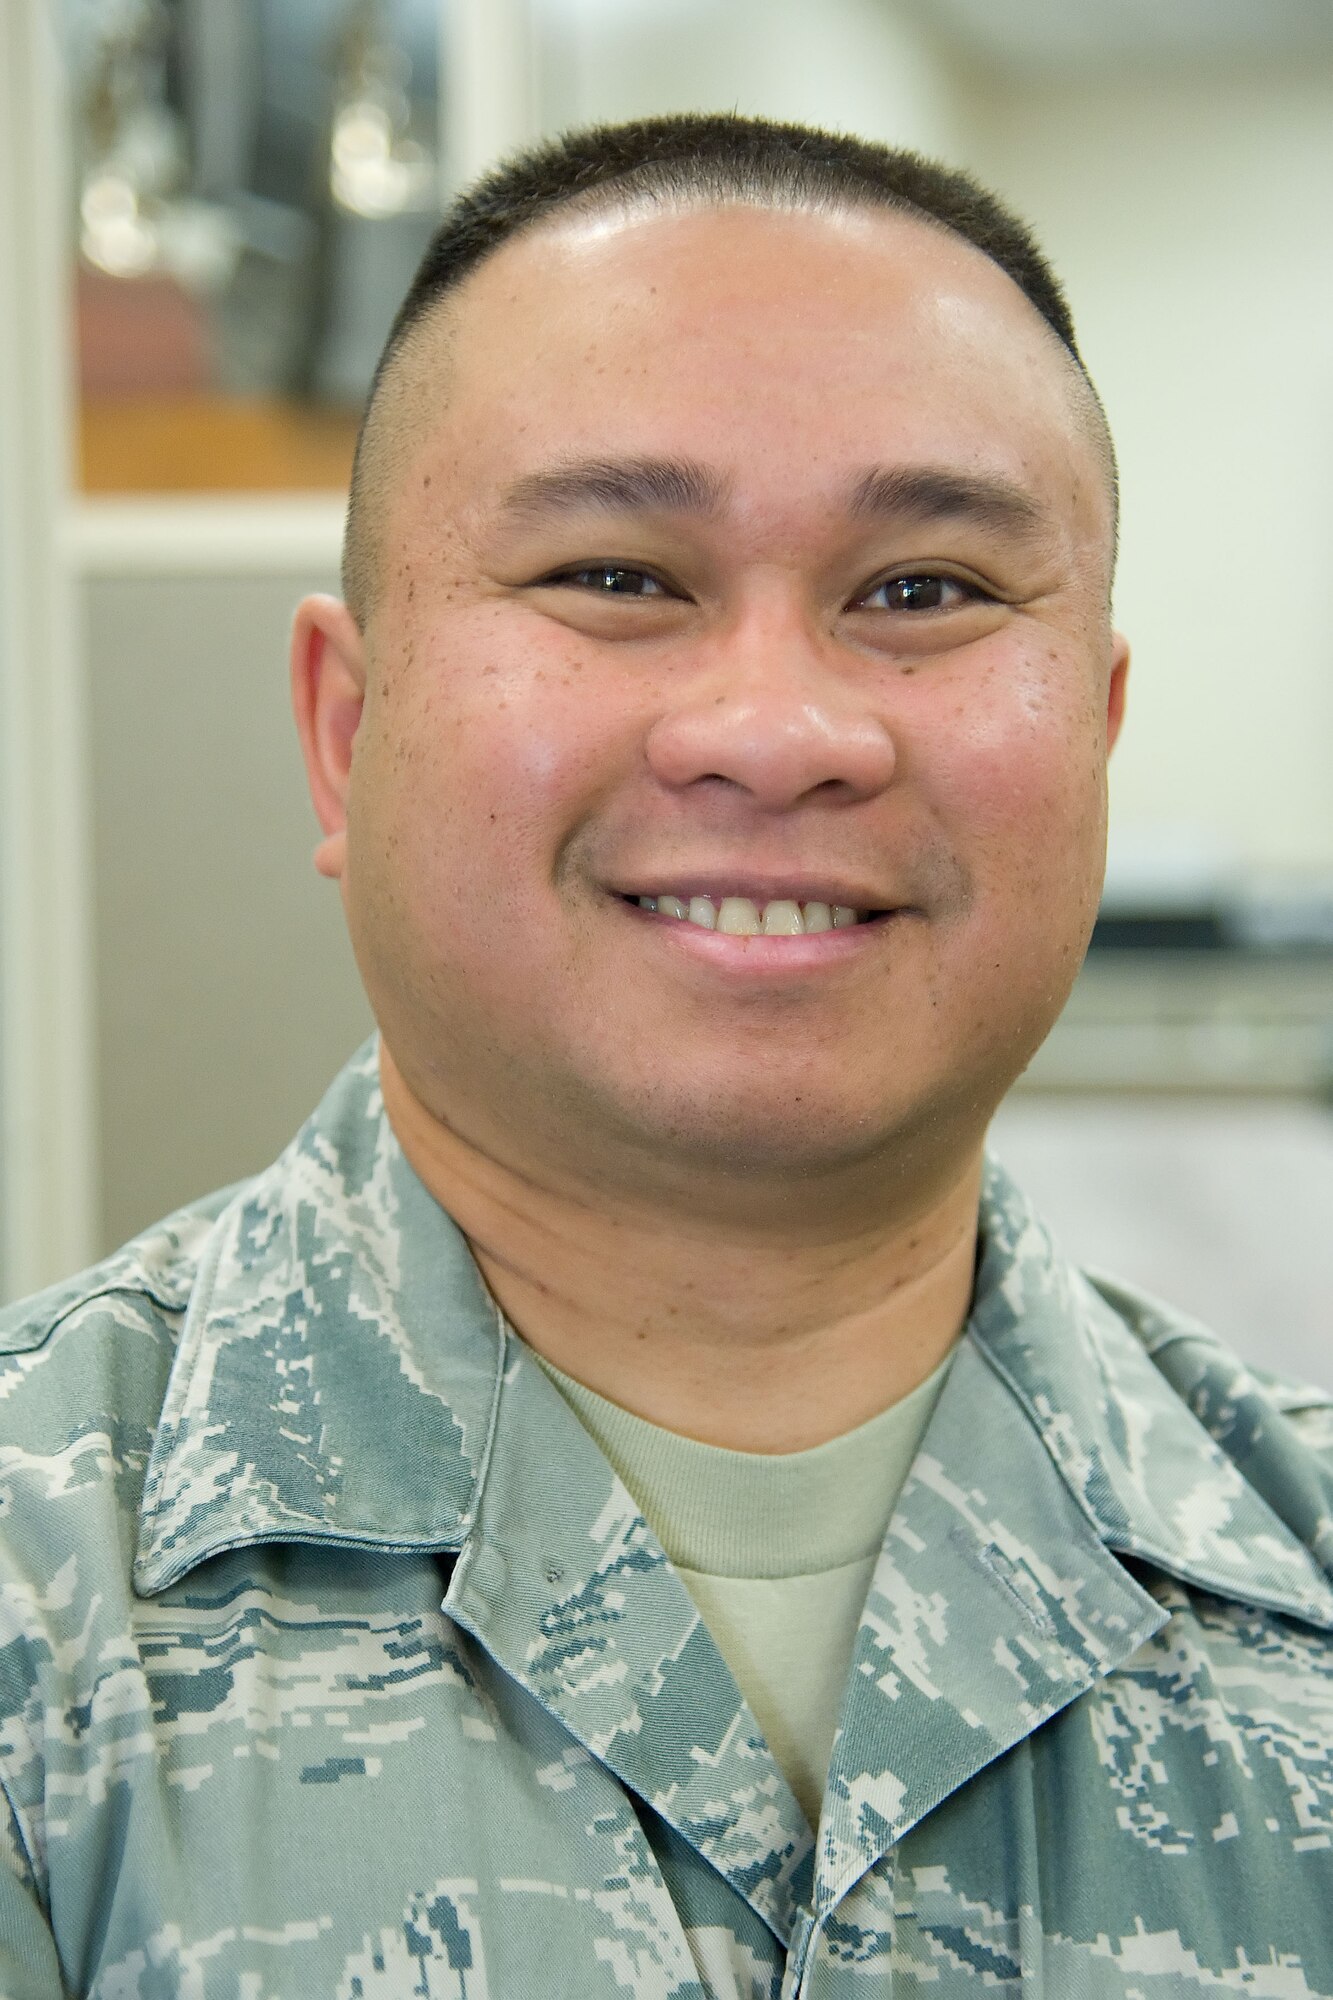 “I will be losing sleep because my wife will have given birth to our first child.”

- Tech. Sgt. Myco Apat 
